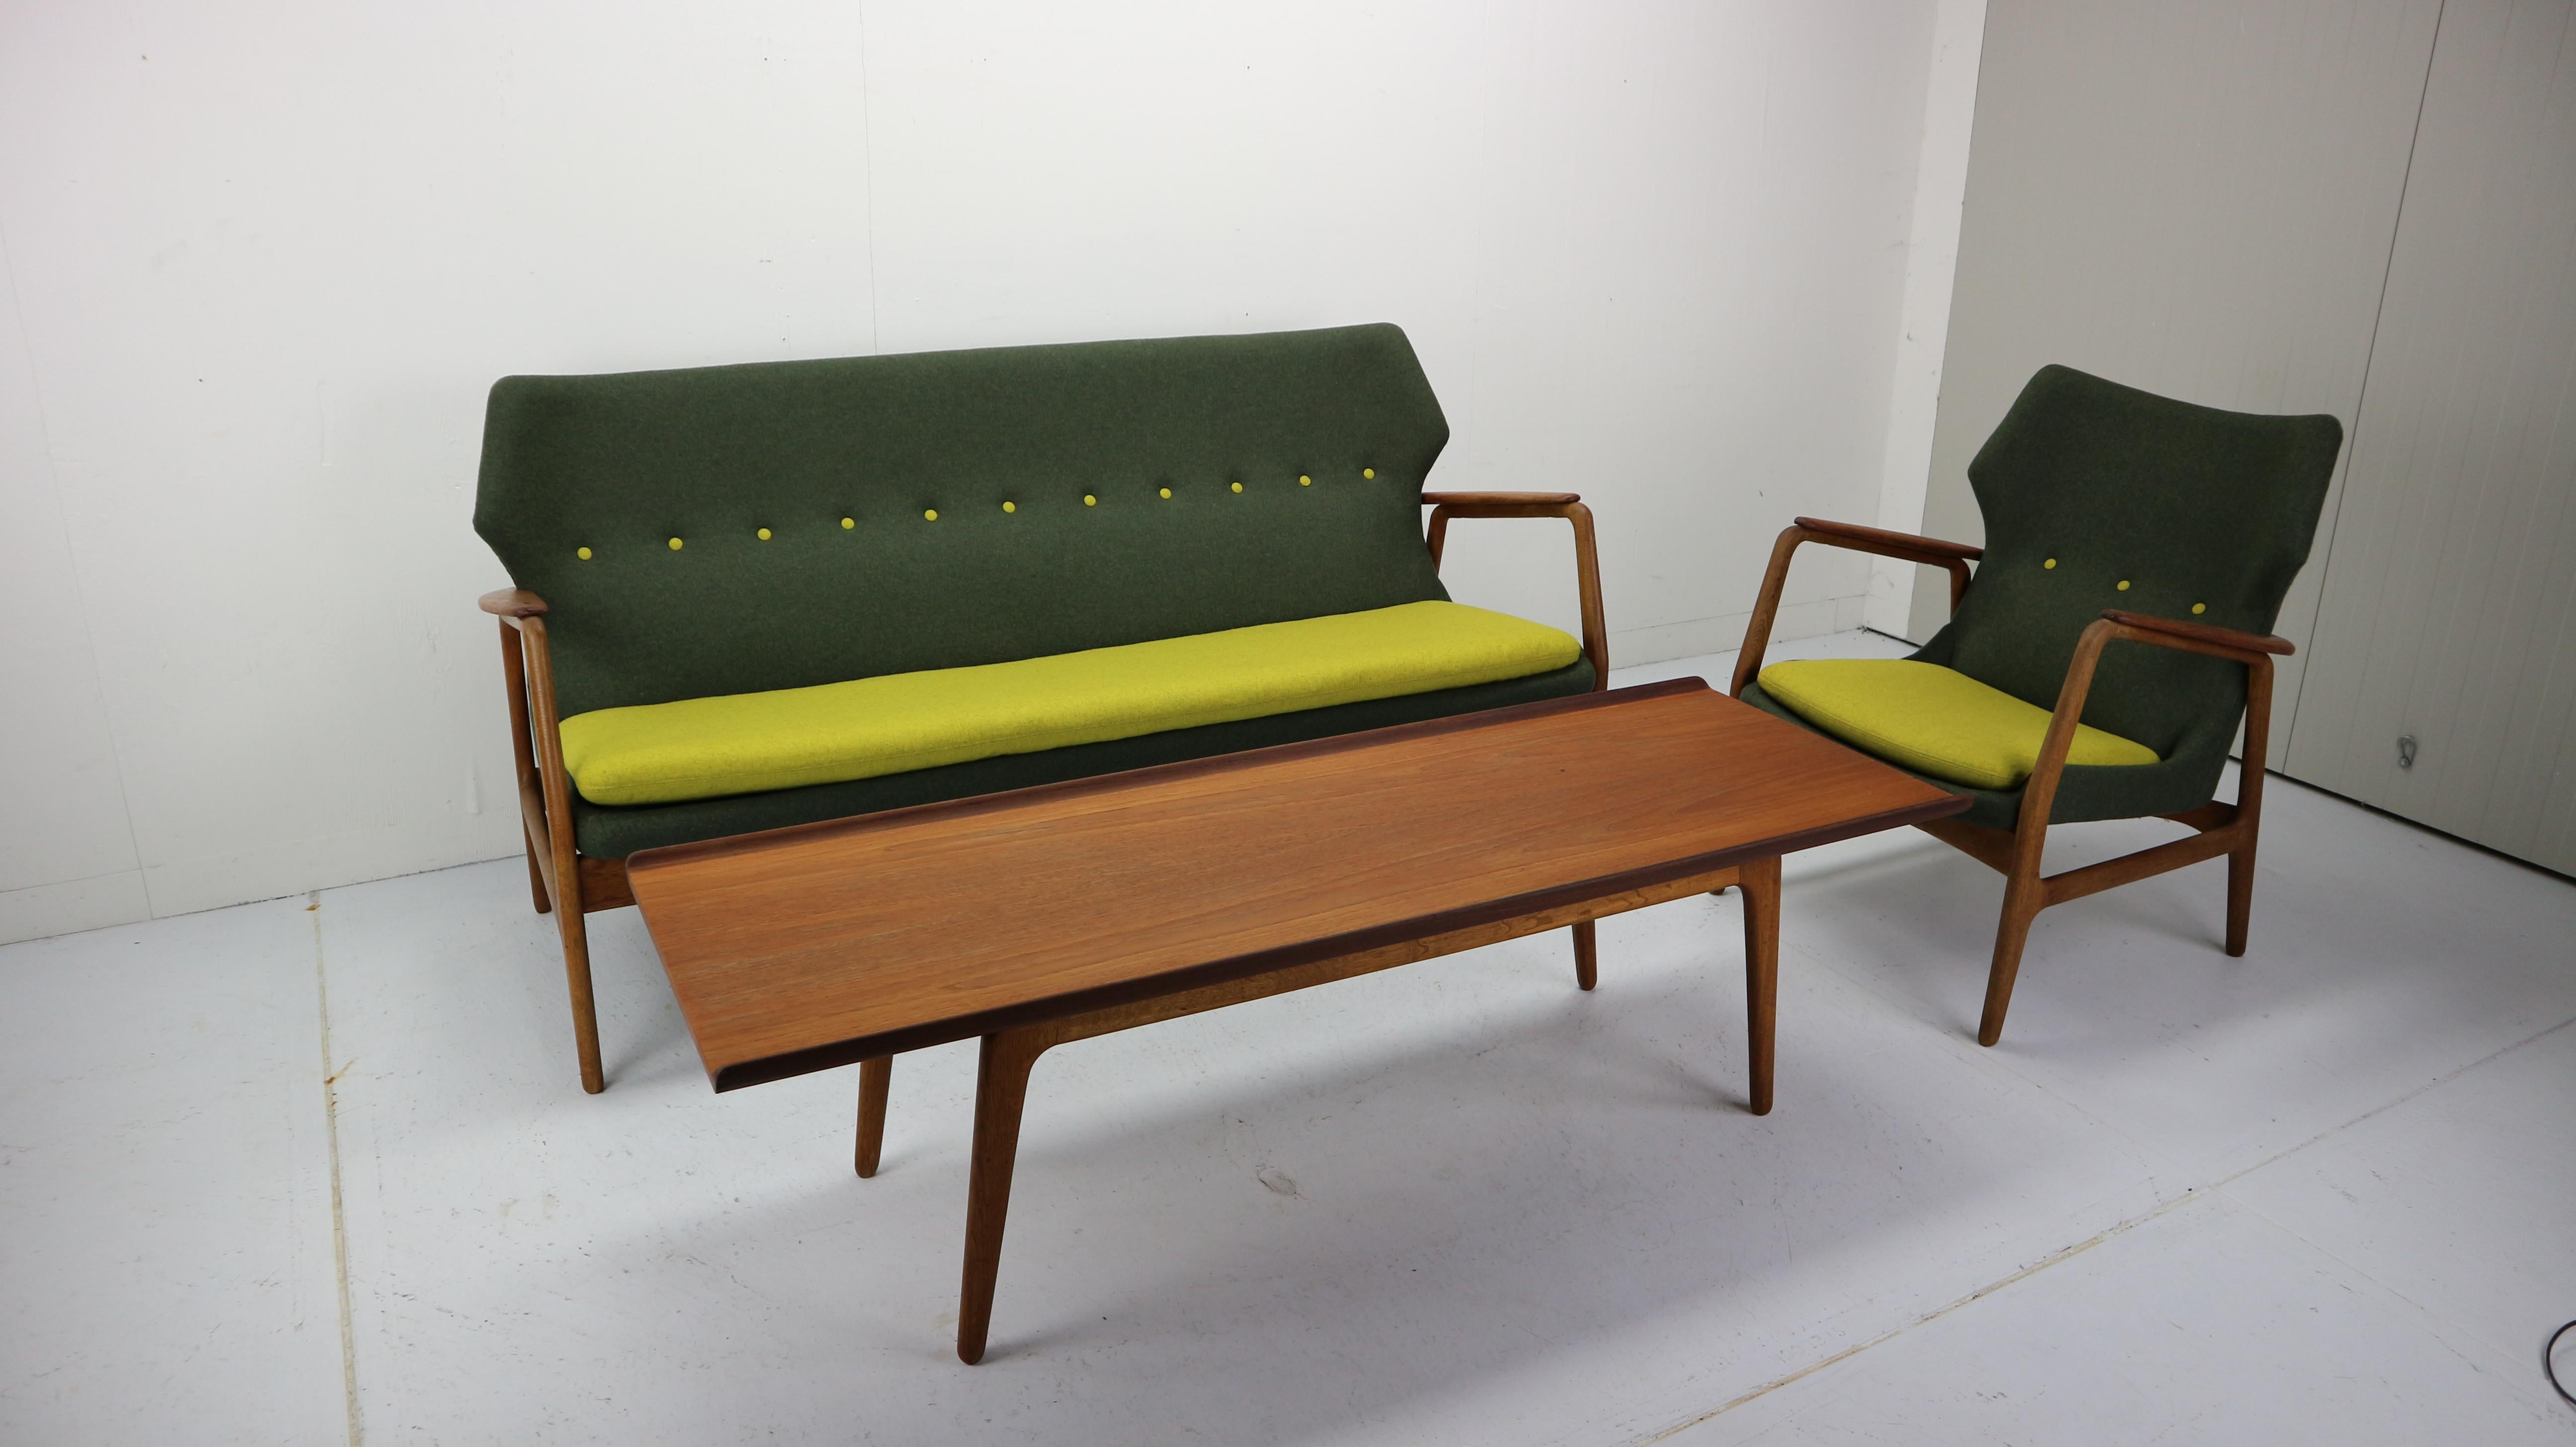 This sitting group consists of a wingback 3-seater, lounge chair and matching table. Designed by Aksel Bender Madsen. Aksel Bender Madsen worked for Bovenkamp in the 1950s and 1960s, this set was produced in 1958. Madsen helped Bovenkamp to